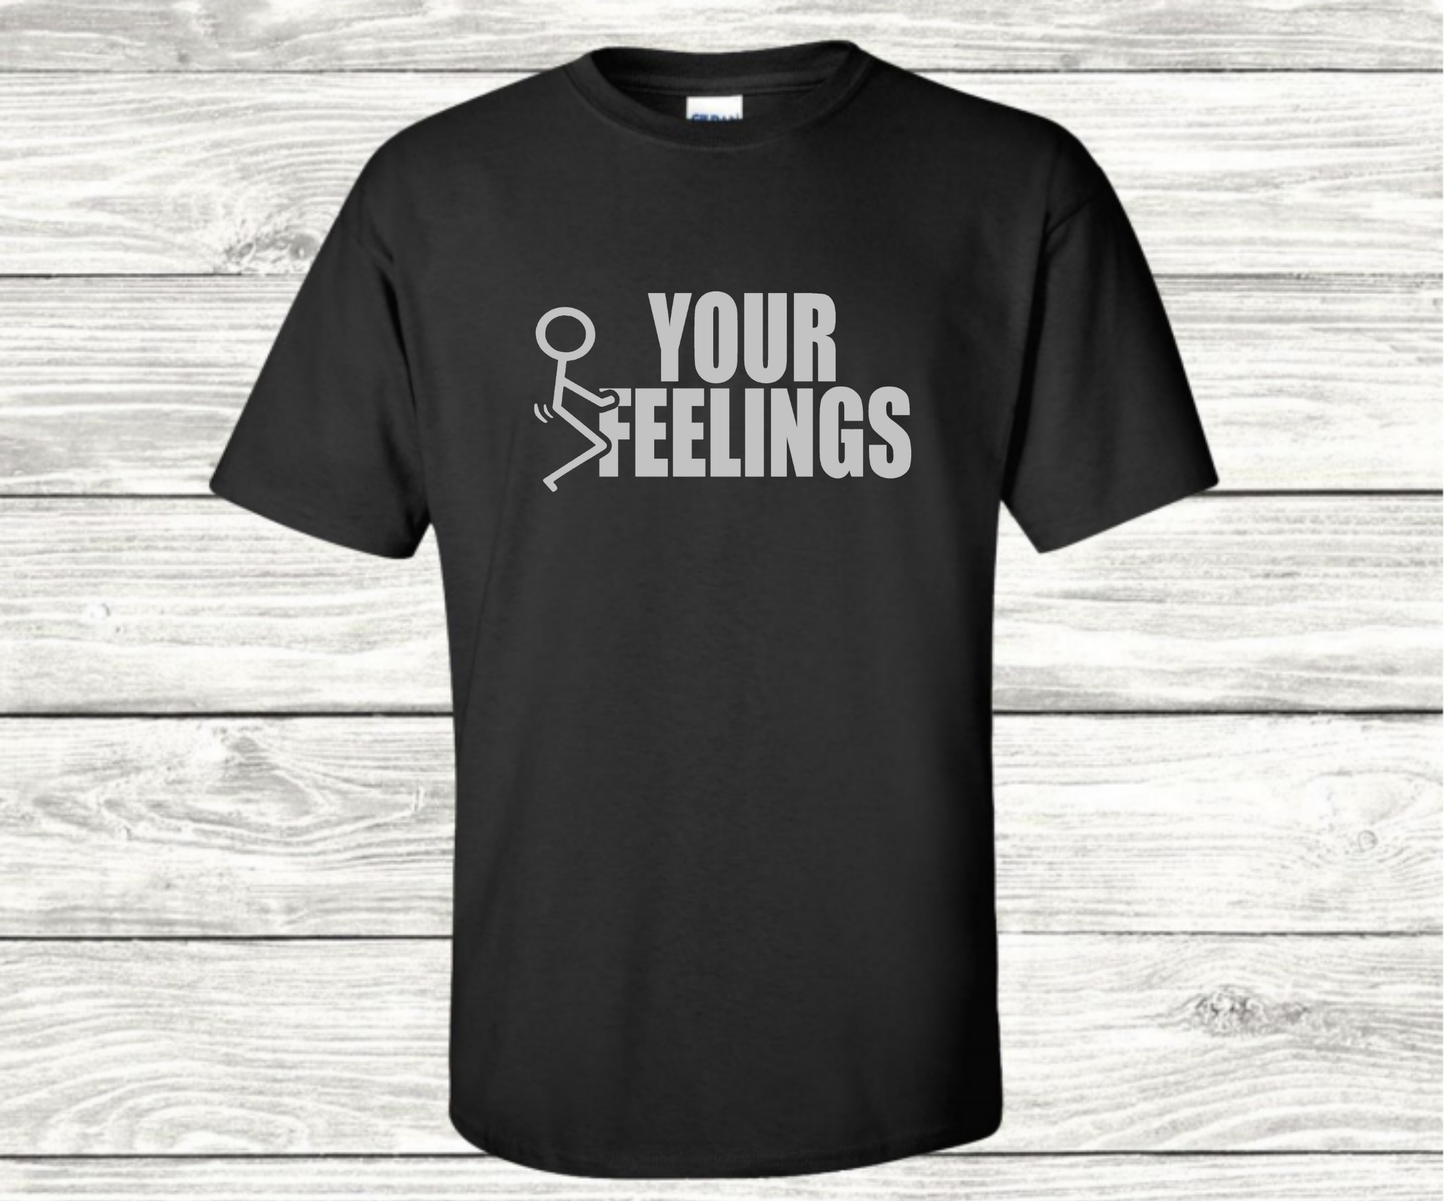 F Your Feelings - Funny T-Shirt - Mister Snarky's